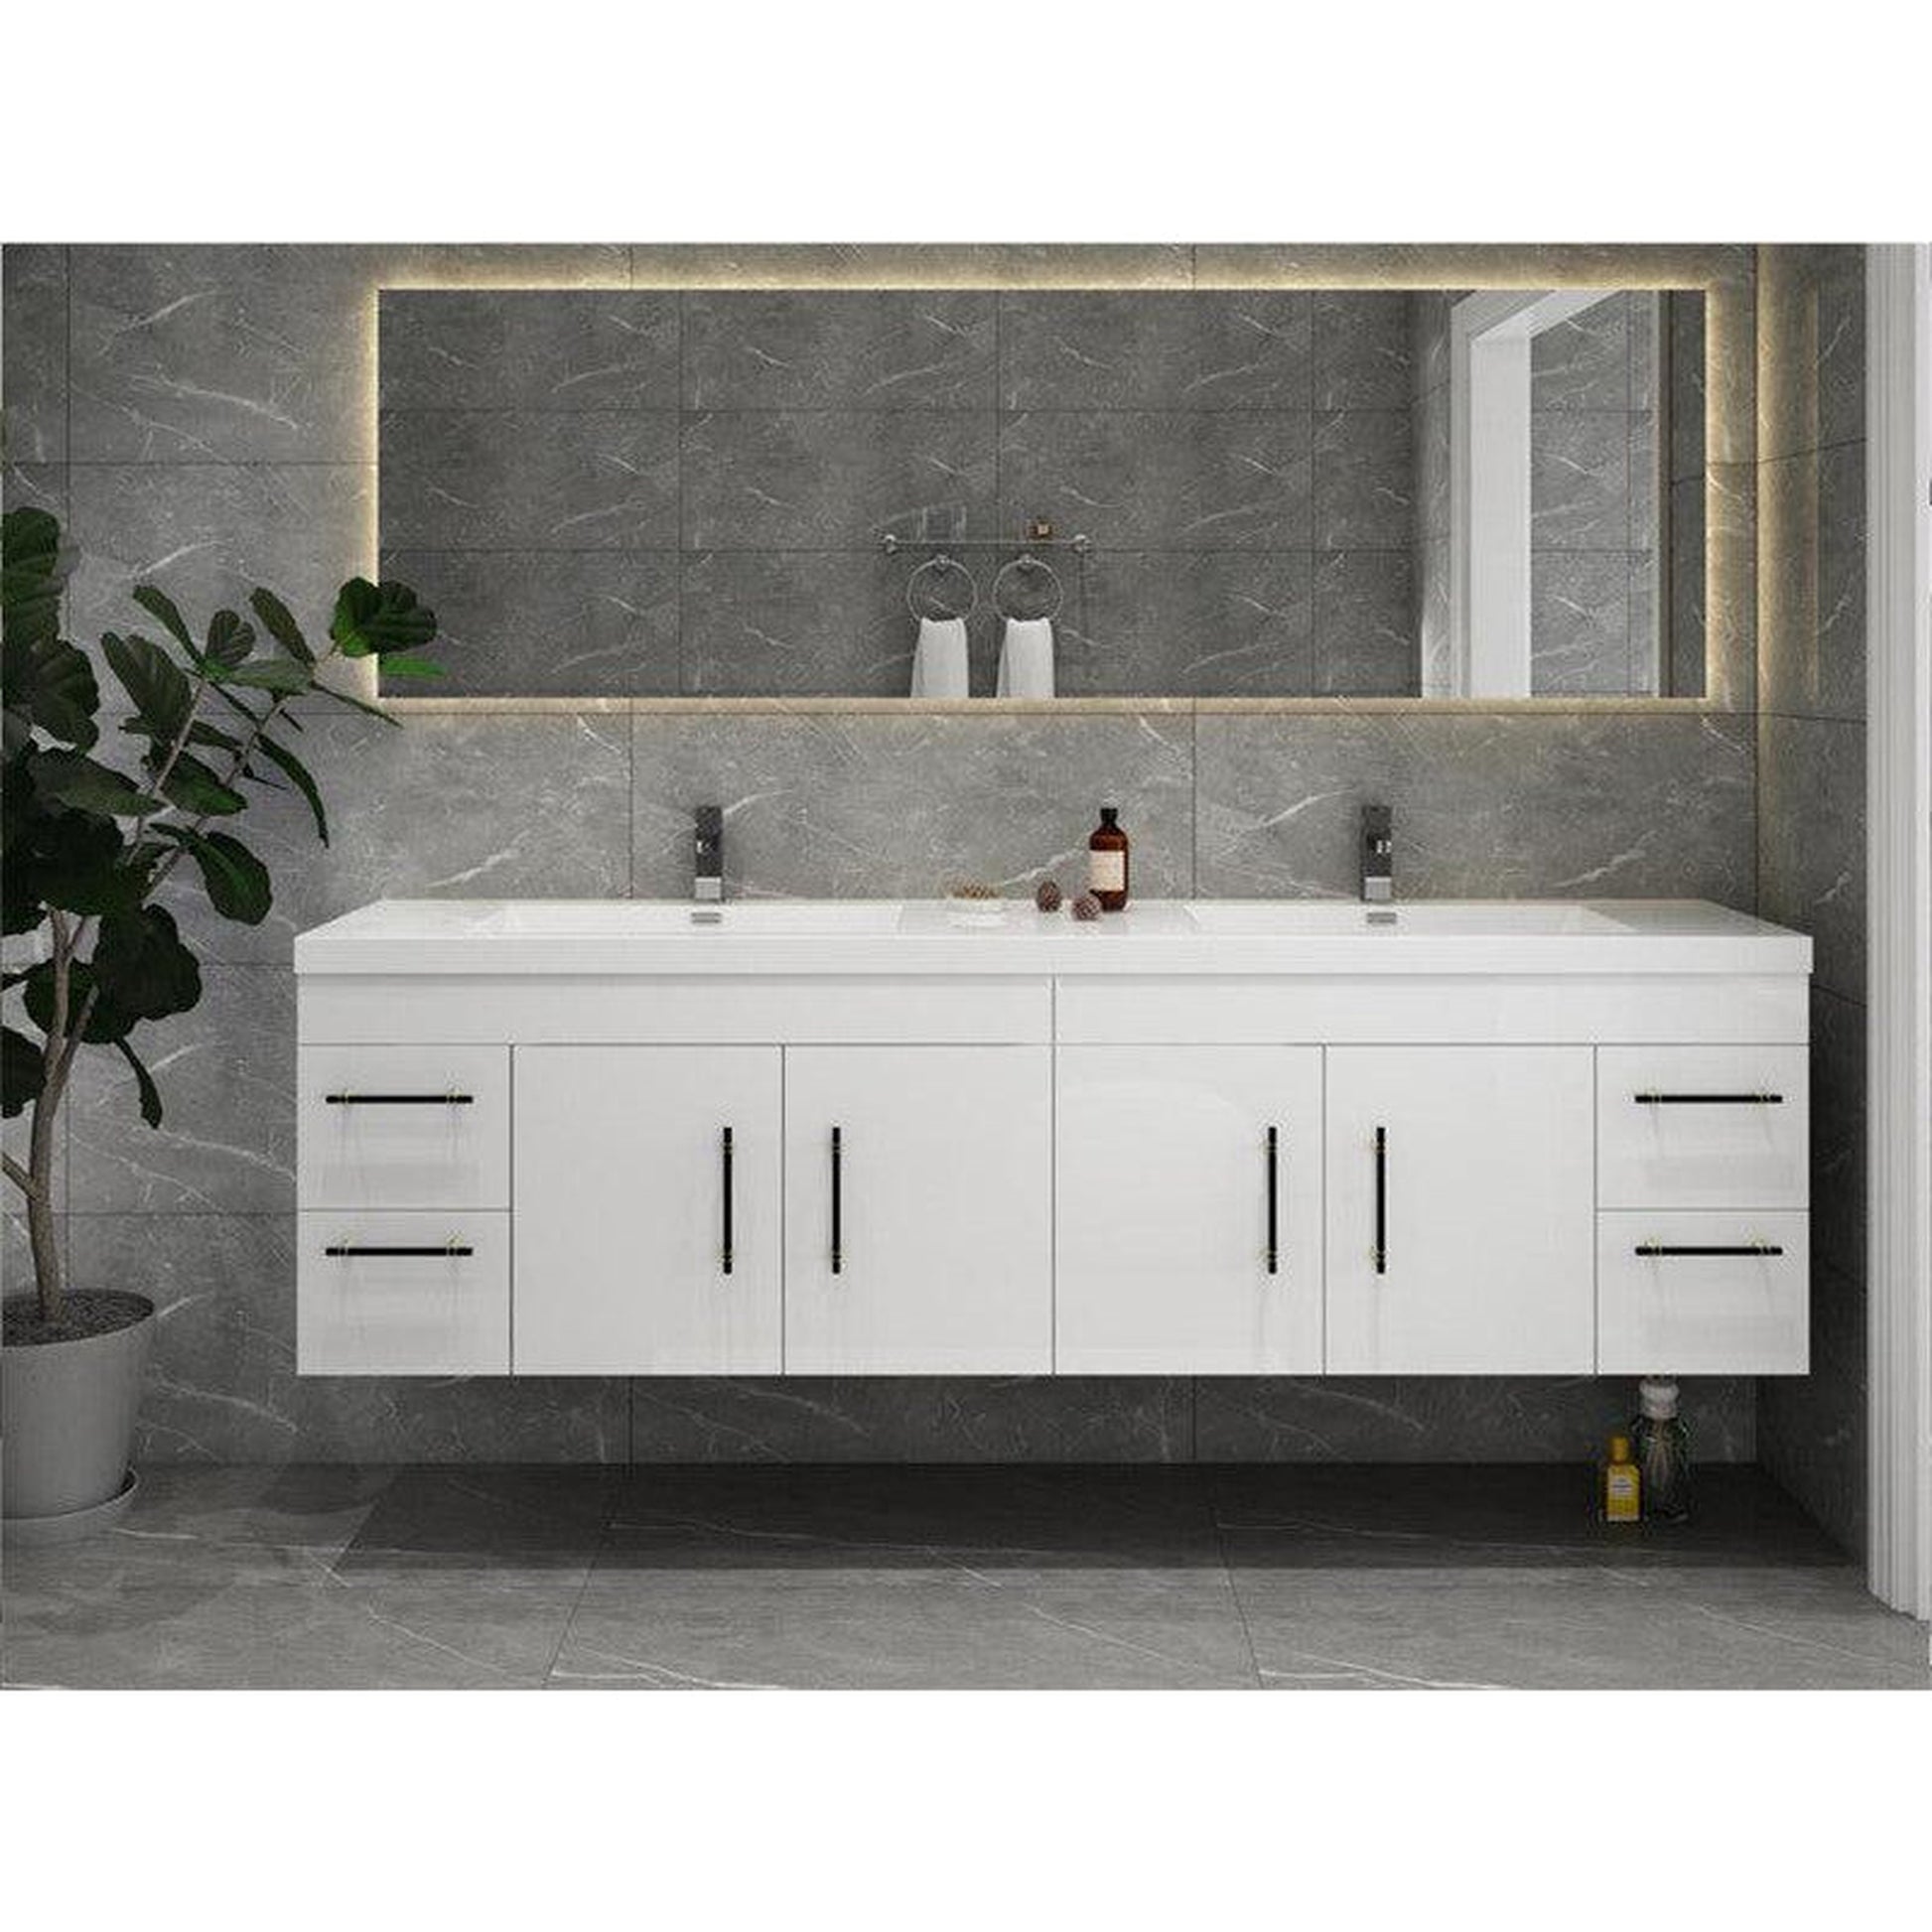 Moreno Bath ELSA 72" High Gloss White Wall-Mounted Vanity With Double Reinforced White Acrylic Sinks